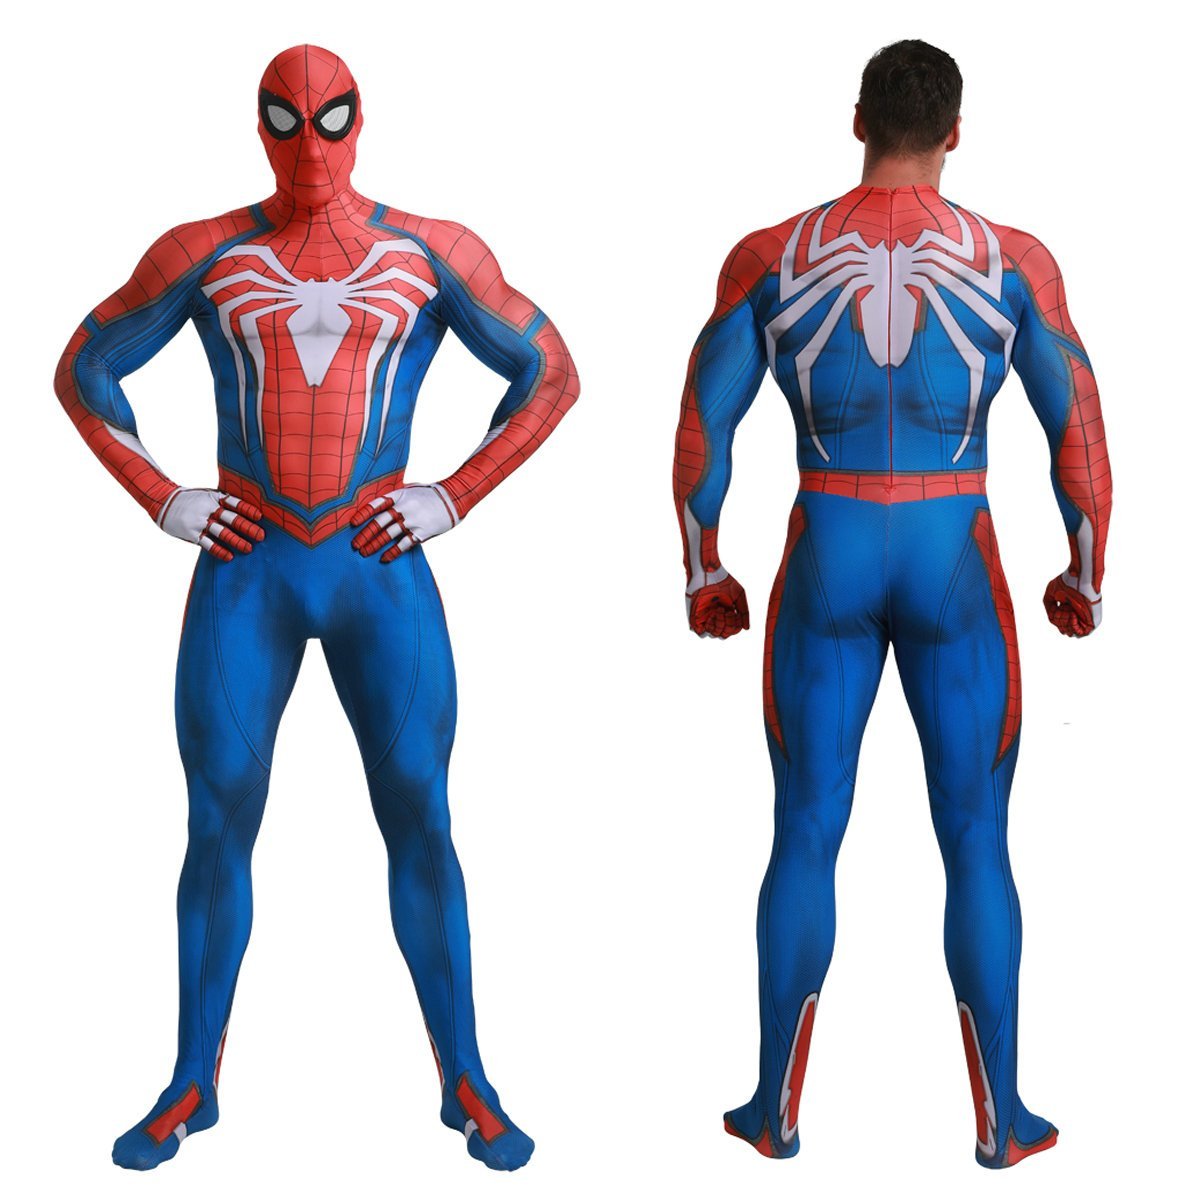 White Spiderman Game Cosplay Jumpsuit Halloween Party Costume for Adult and kids